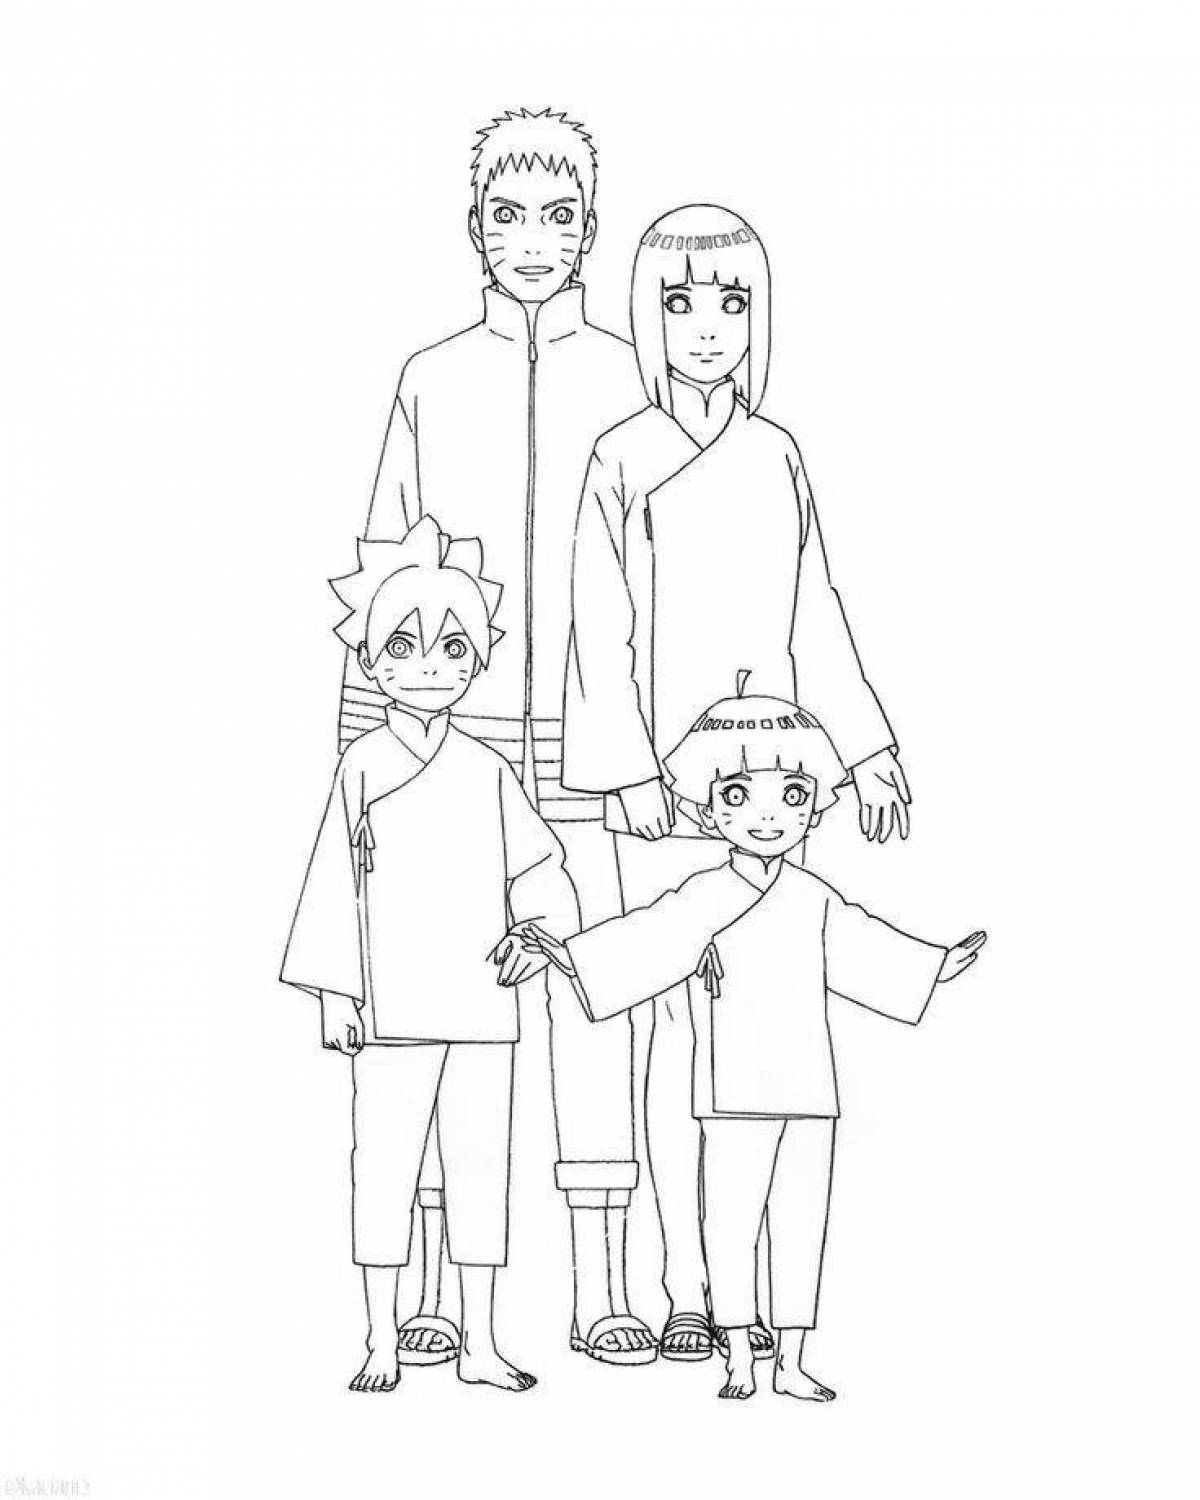 Awesome naruto and boruto coloring pages